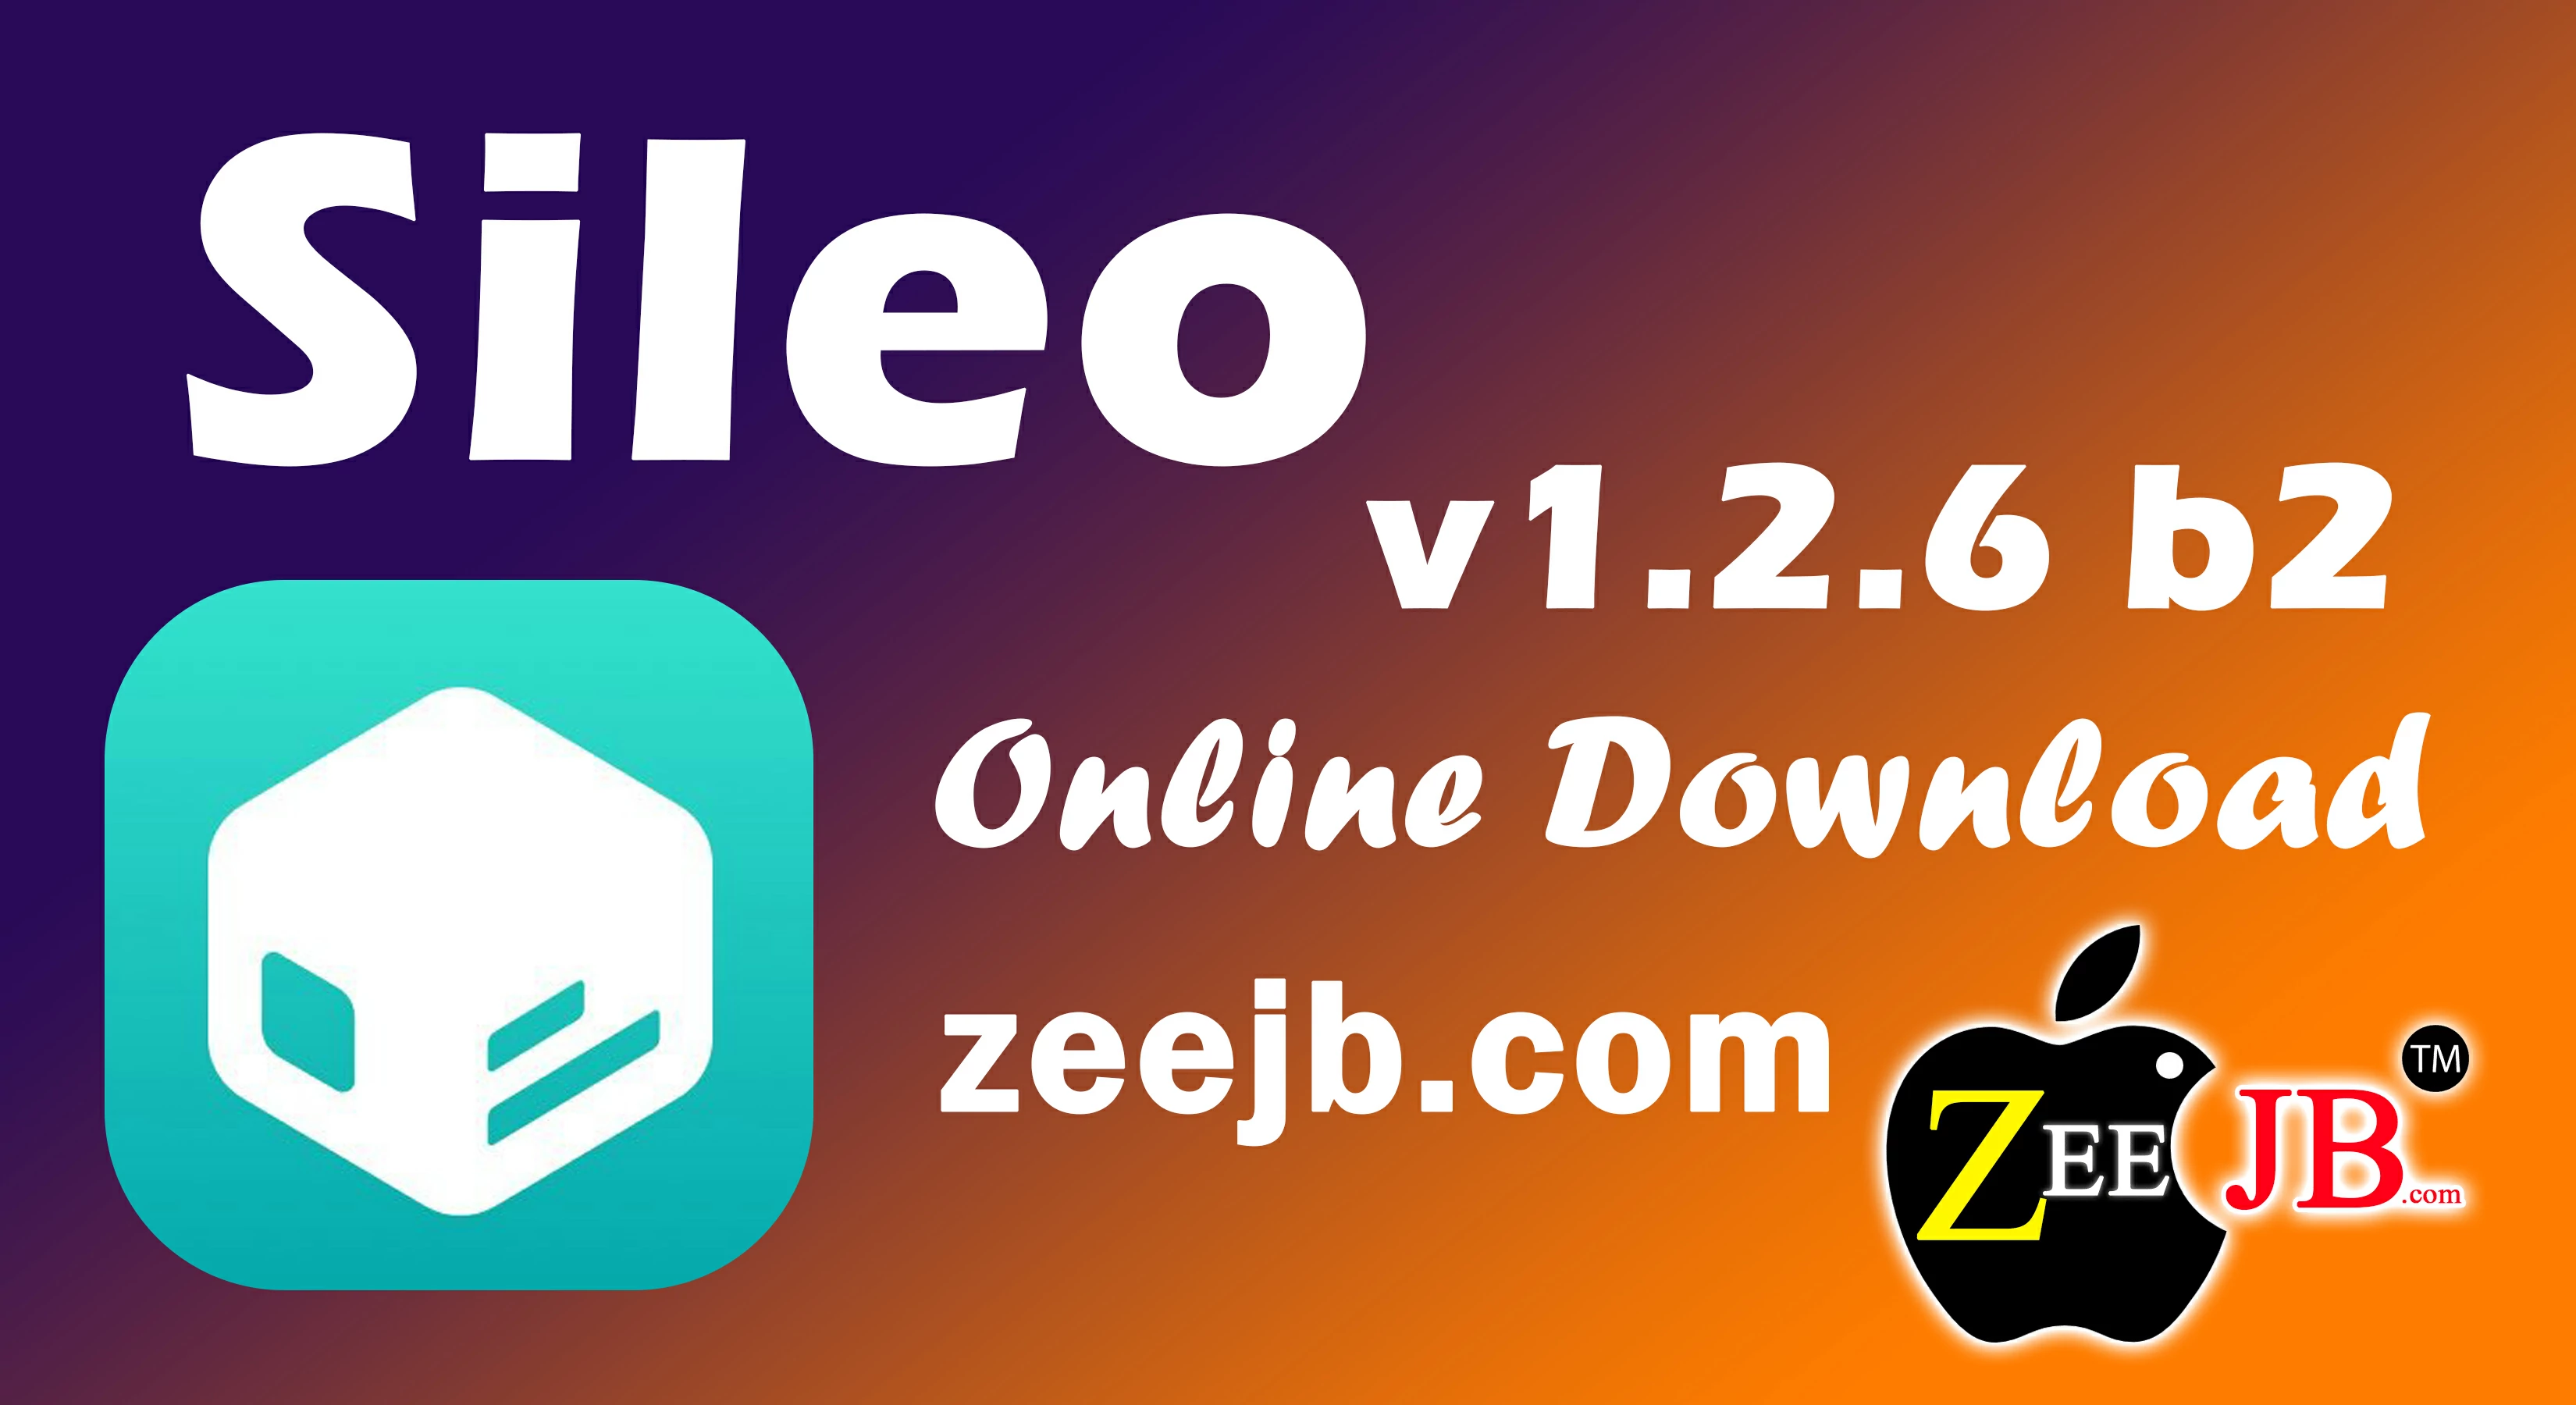 Sileo is a Cydia alternative to install jailbreak tweaks, apps, and themes on the iPhone or iPad. Users can grab Sileo from and is available now. Non-Jailbroken users also can download Sileo.